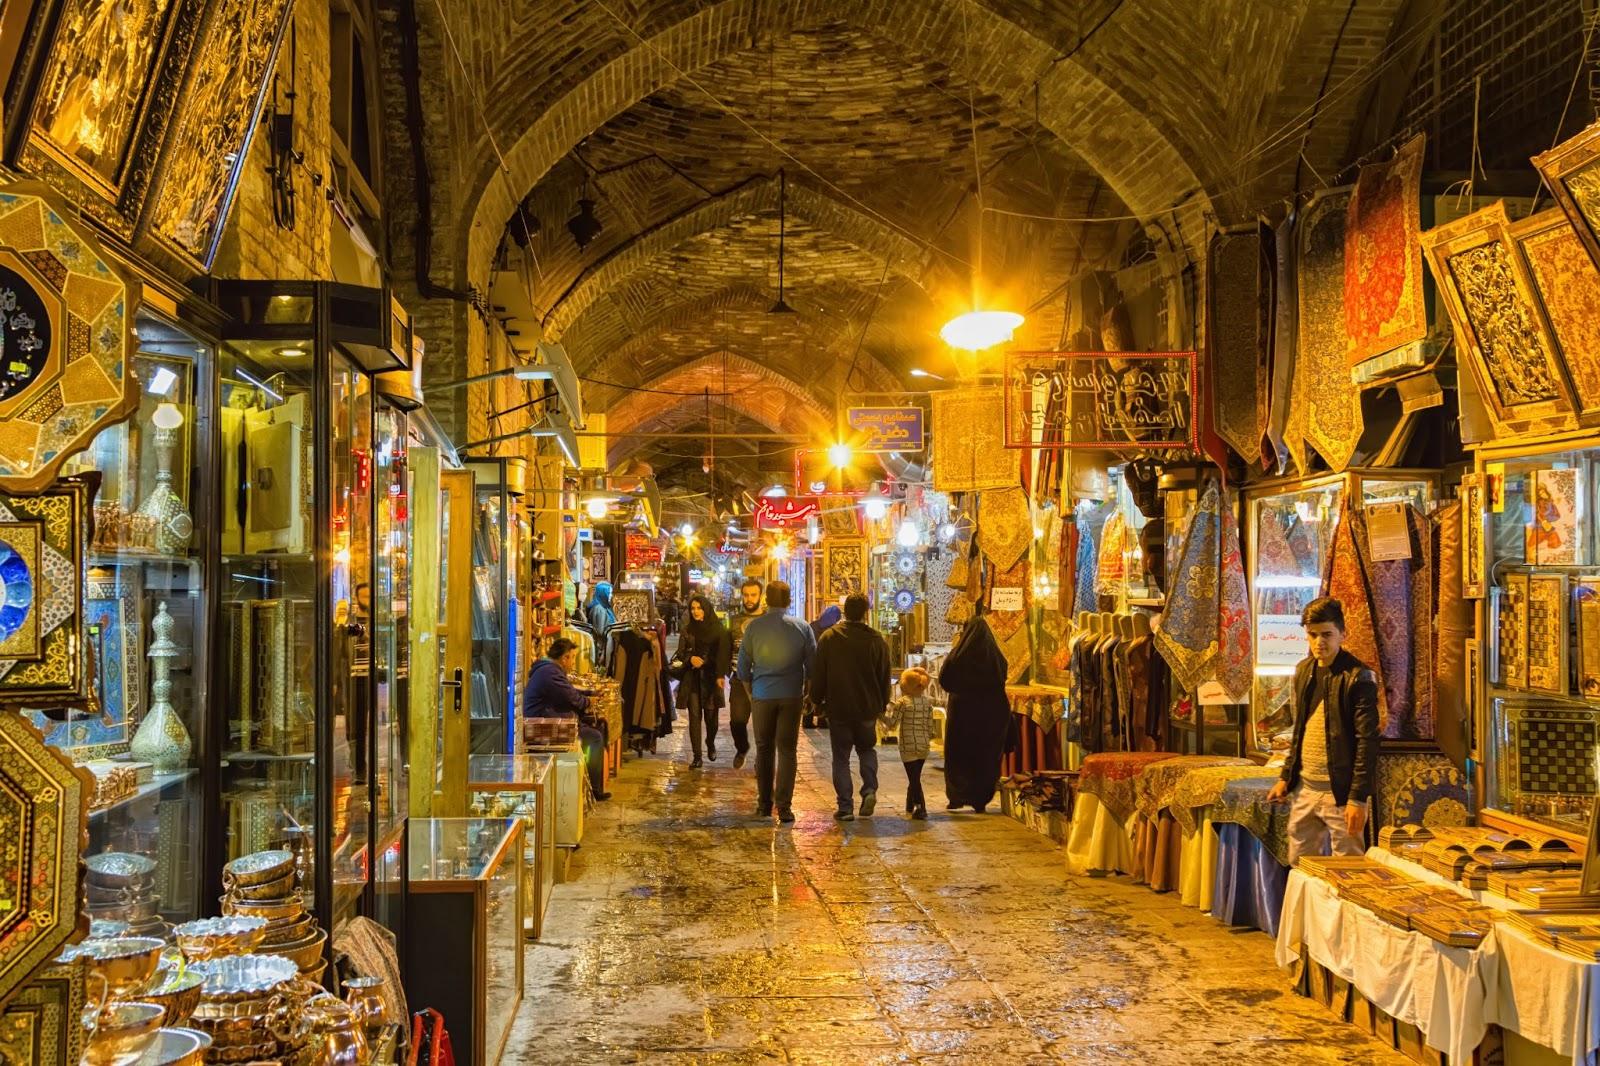 Traditional iranian bazaar in Isfahan at Imam Square. It is a historical market and one of the oldest and largest bazaars of the Middle East.